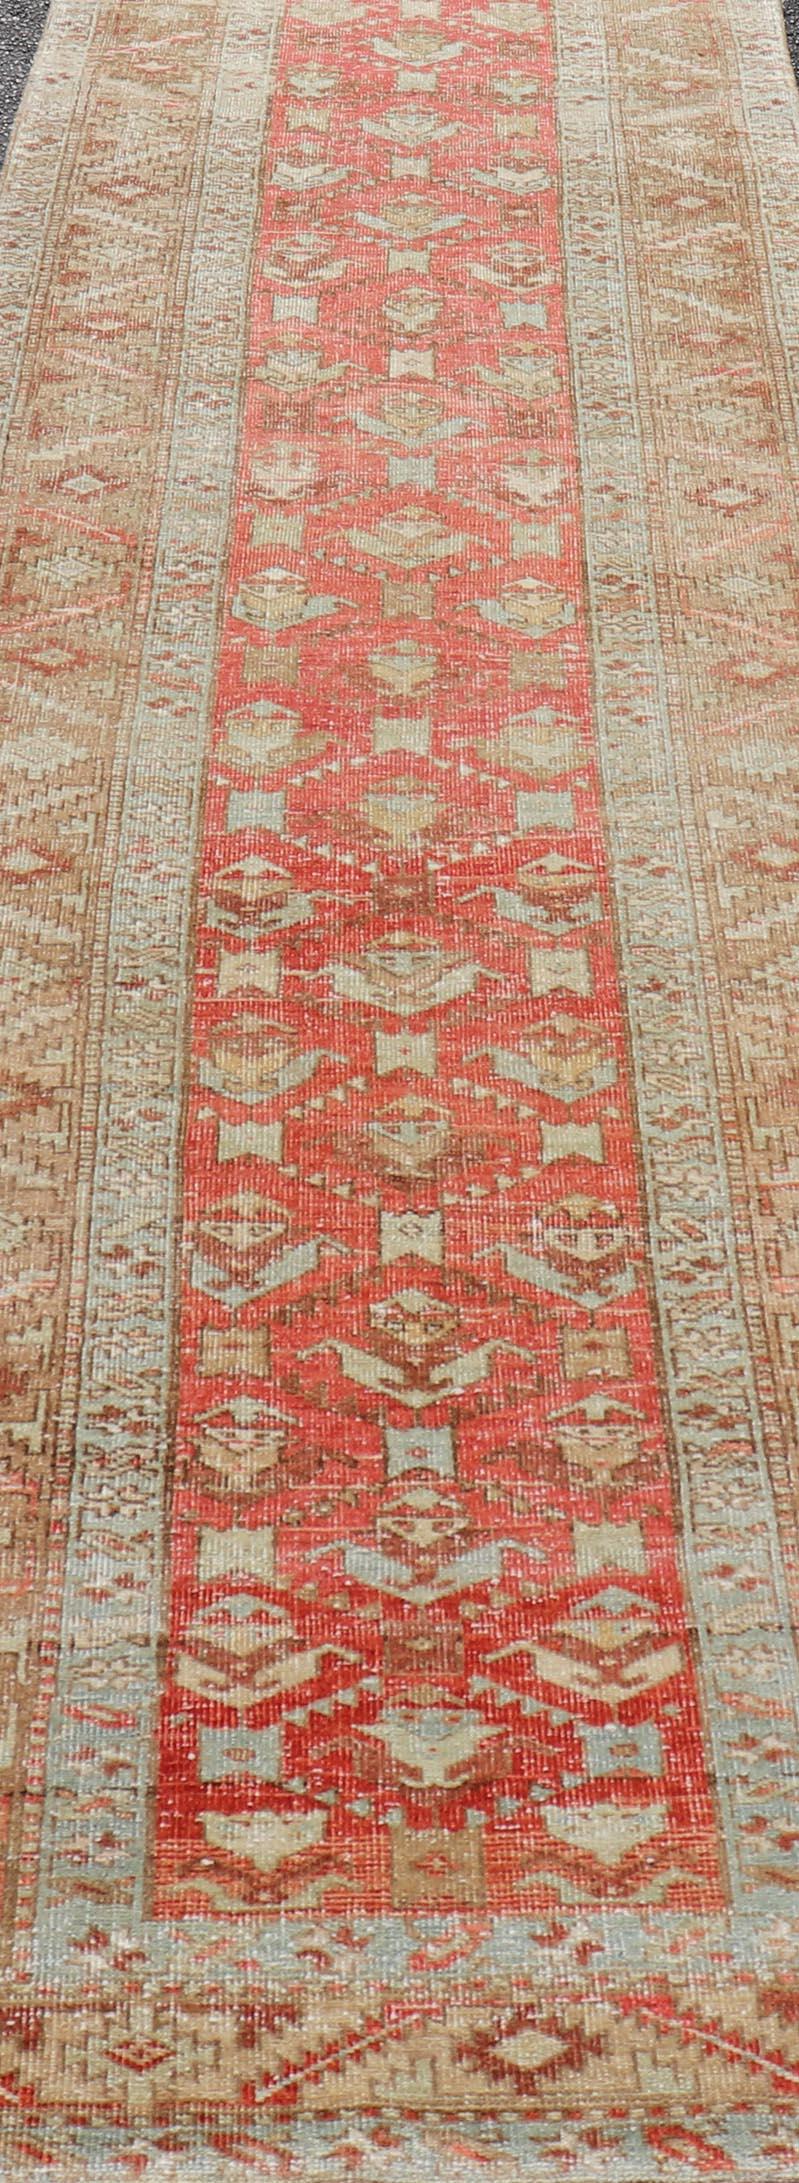 Measures: 3'0 x 11'7 
Persian Antique Heriz Runner With All-Over Geometric Design On A Red Field. Antique Heriz Runner, rug TU-MTU-4678, country of origin / type: Persian / Heriz, circa Early-20th Century.

This gorgeous antique Persian Heriz runner